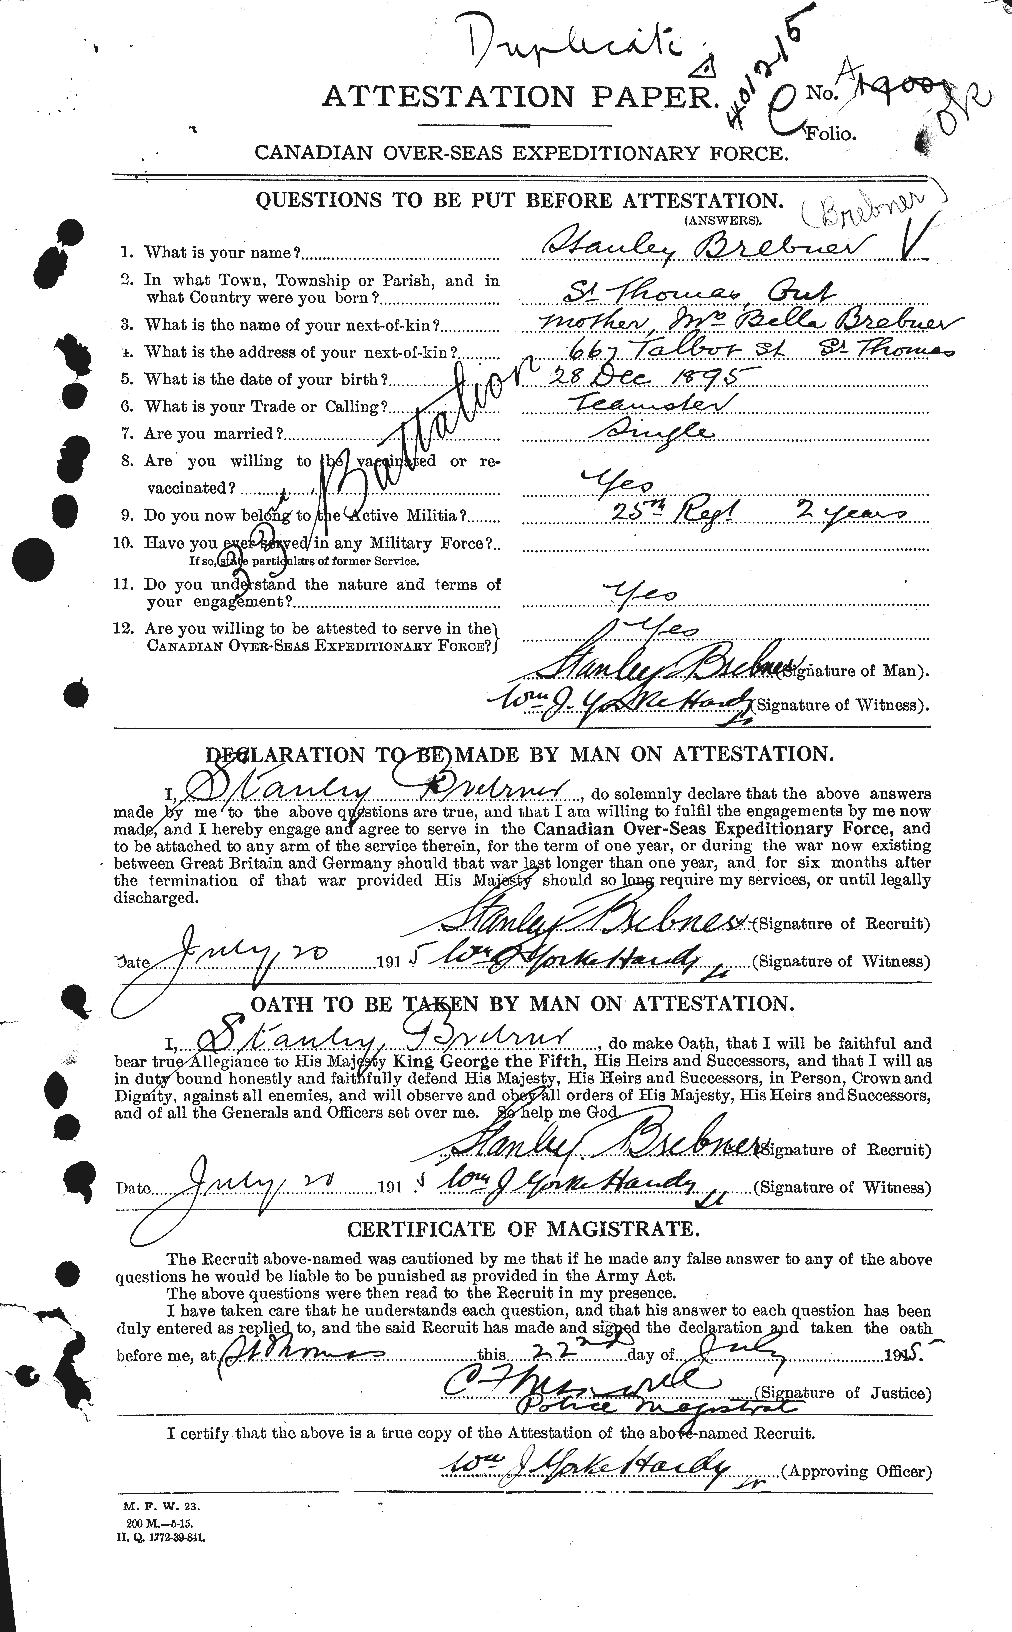 Personnel Records of the First World War - CEF 262852a